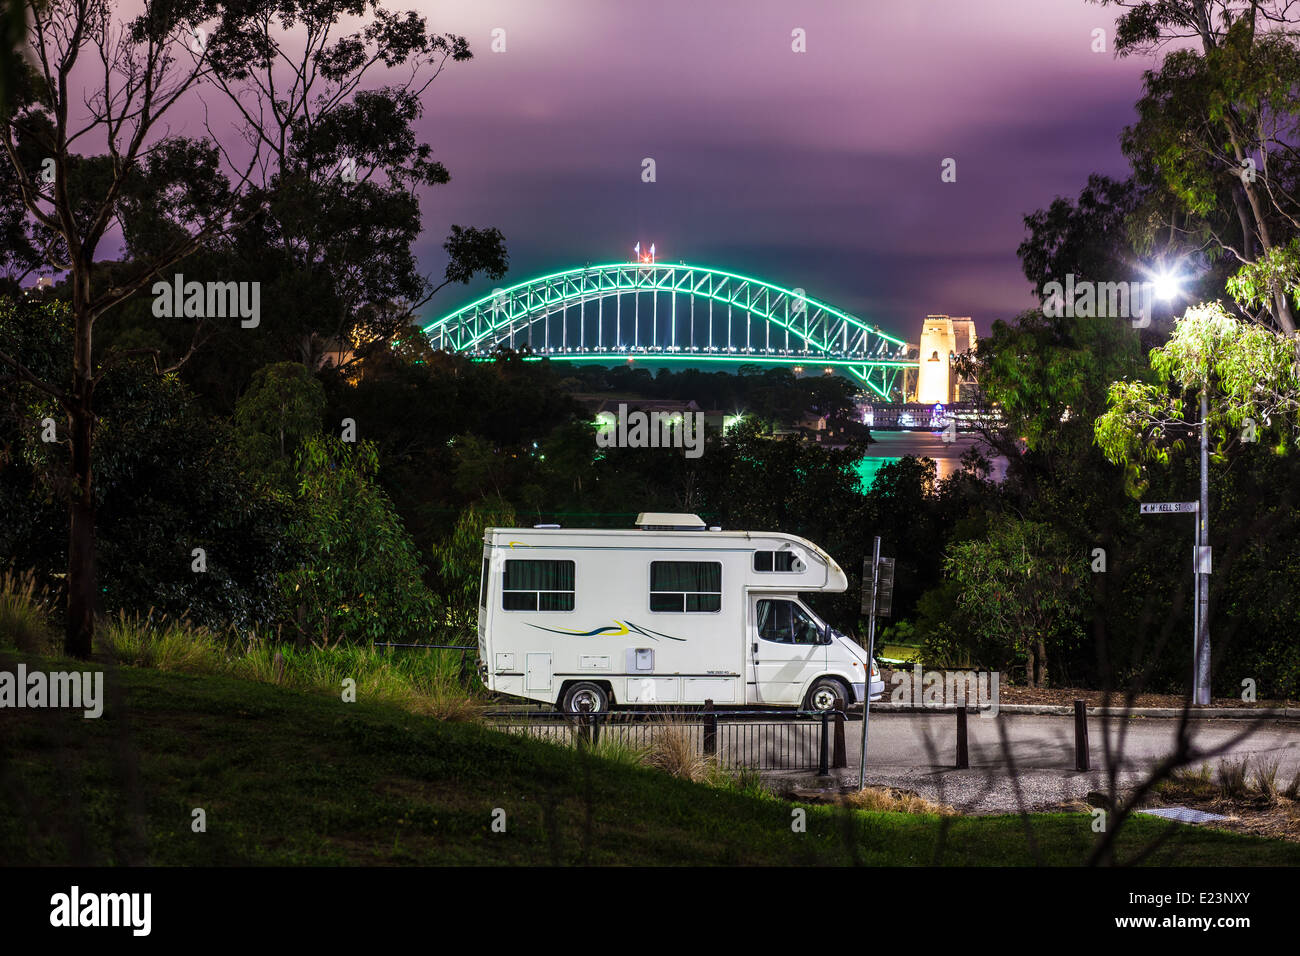 A motor-home camping in Mort Bay, Balmain in Sydney photographed against the backdrop of the Sydney Harbour Bridge Stock Photo